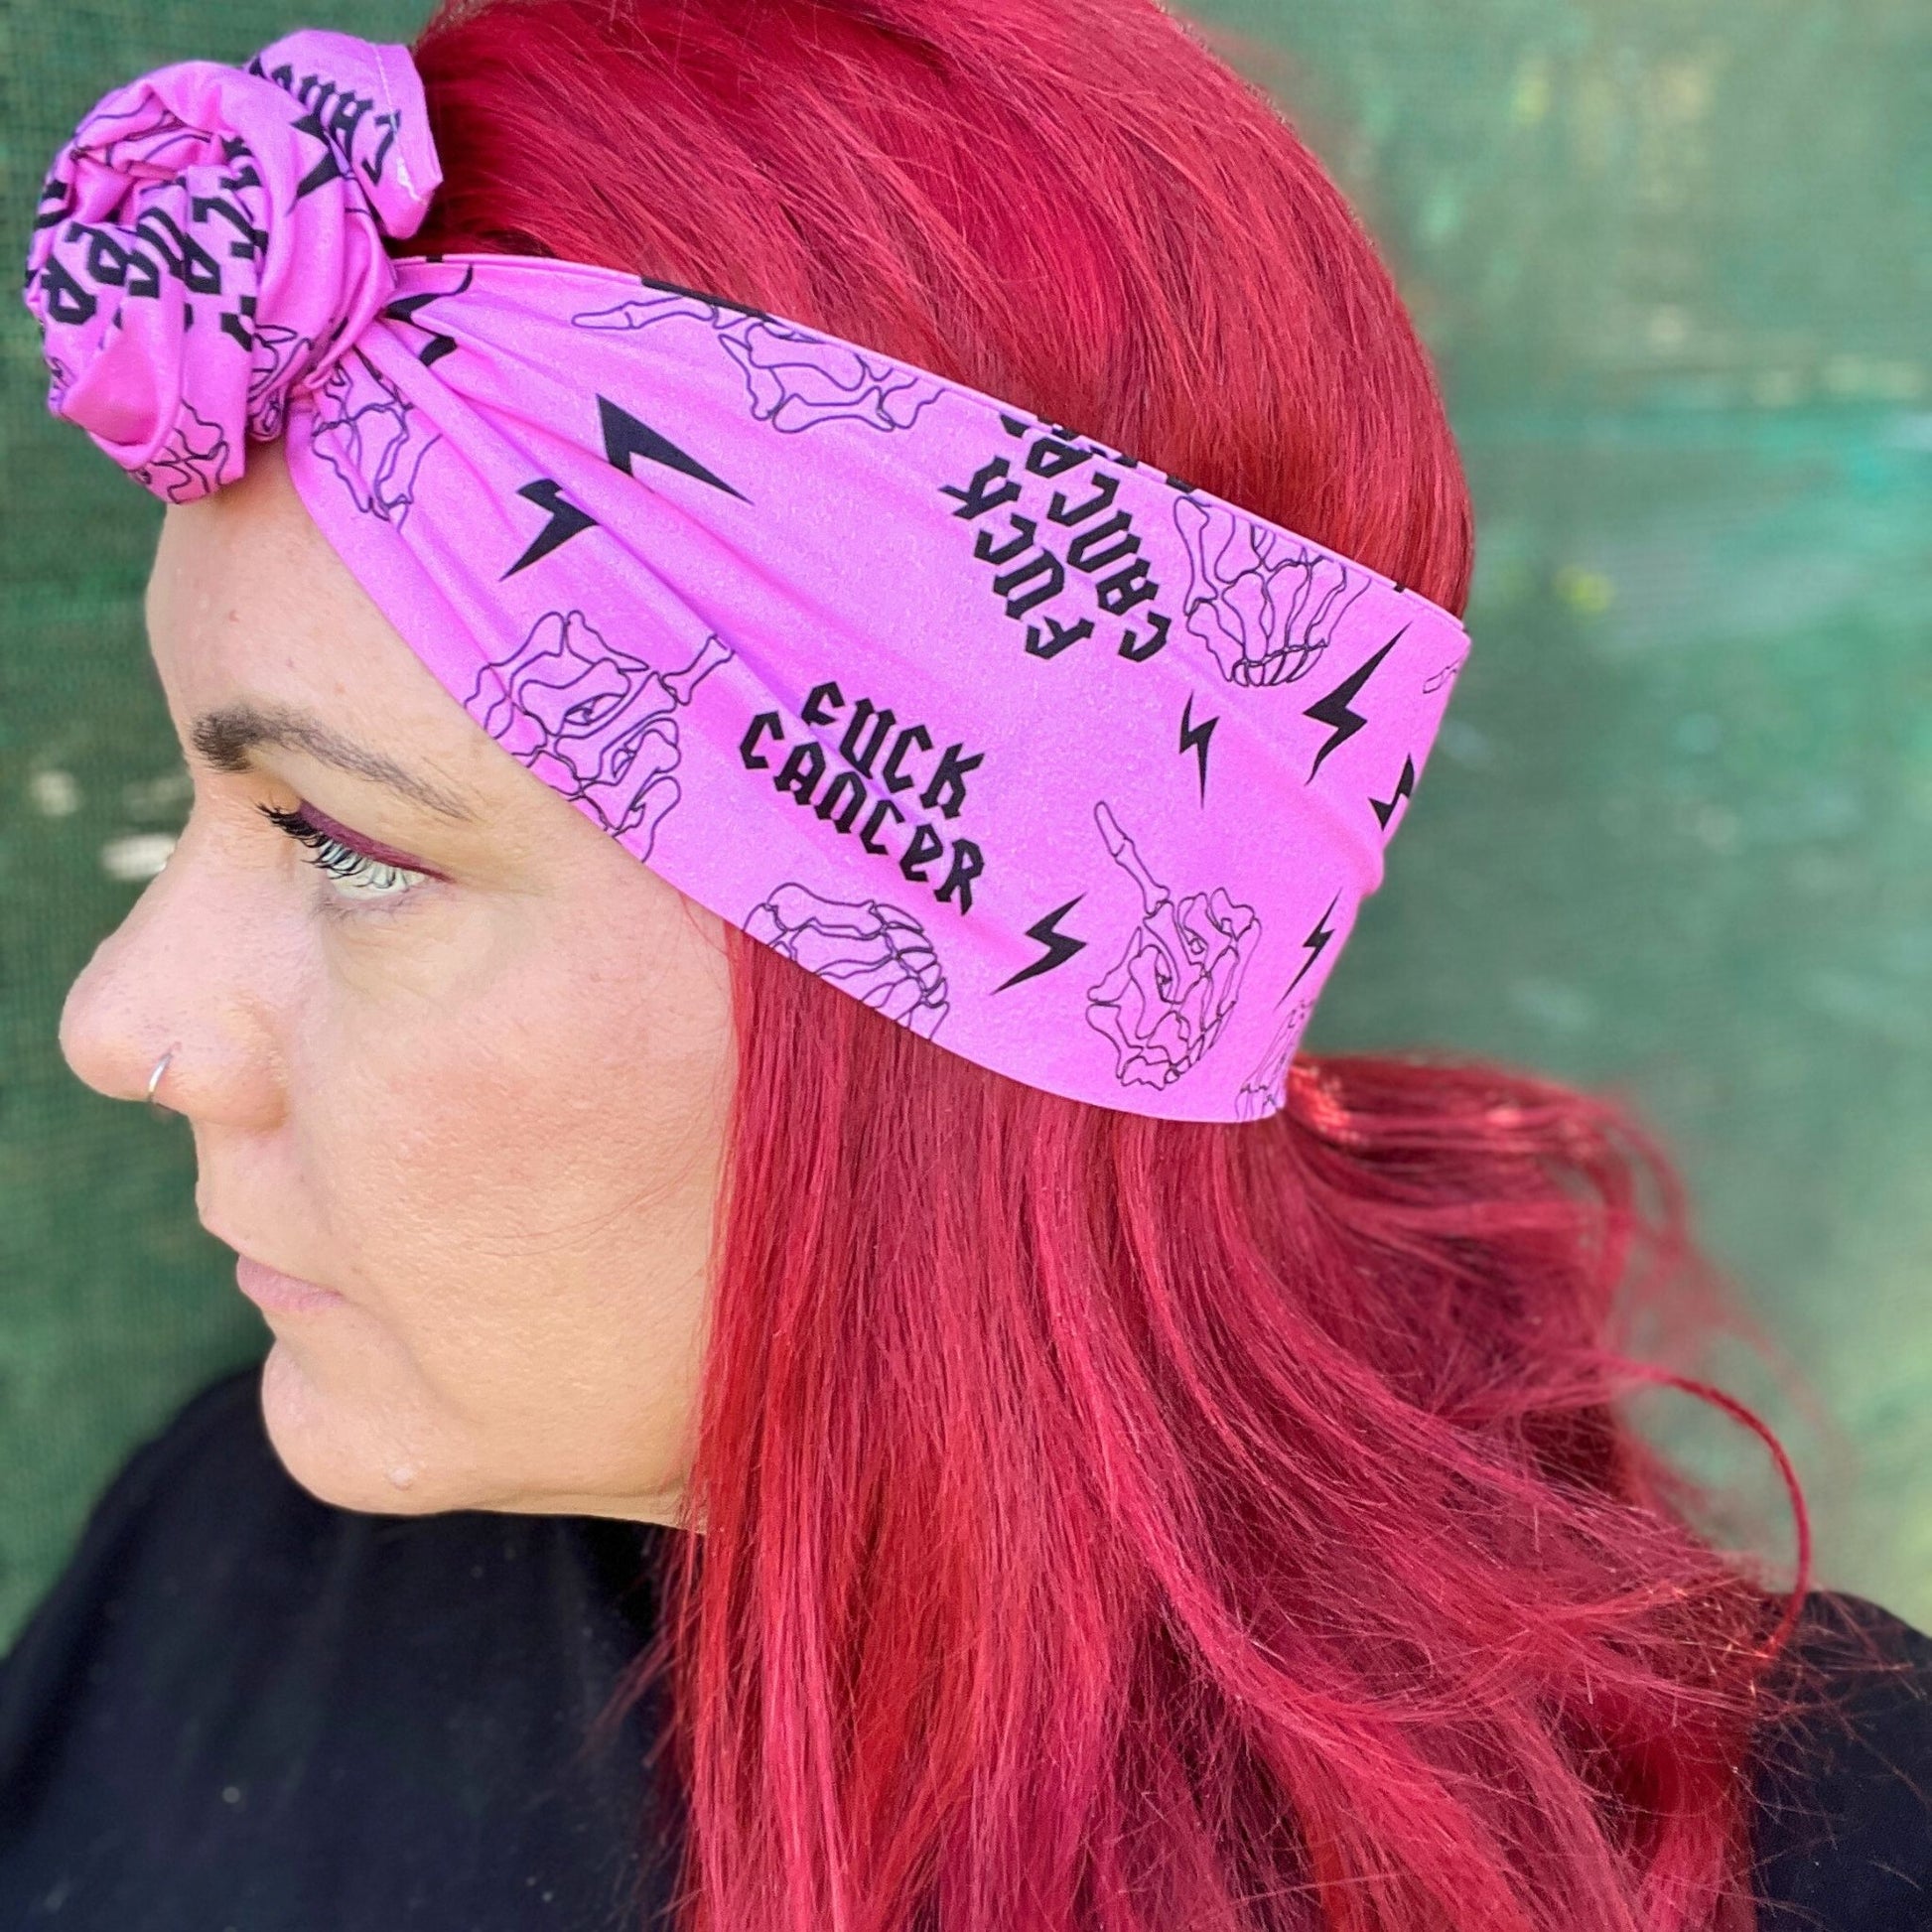 Fuck cancer wire headband Explore our range of Melbourne handmade hair accessories specifically designed for thinning hair. Enjoy ultimate comfort with our 'no headache' headbands, perfect for sensitive scalps.  Stylish solutions that respect your hair's delicate nature. Shop our collection today. 